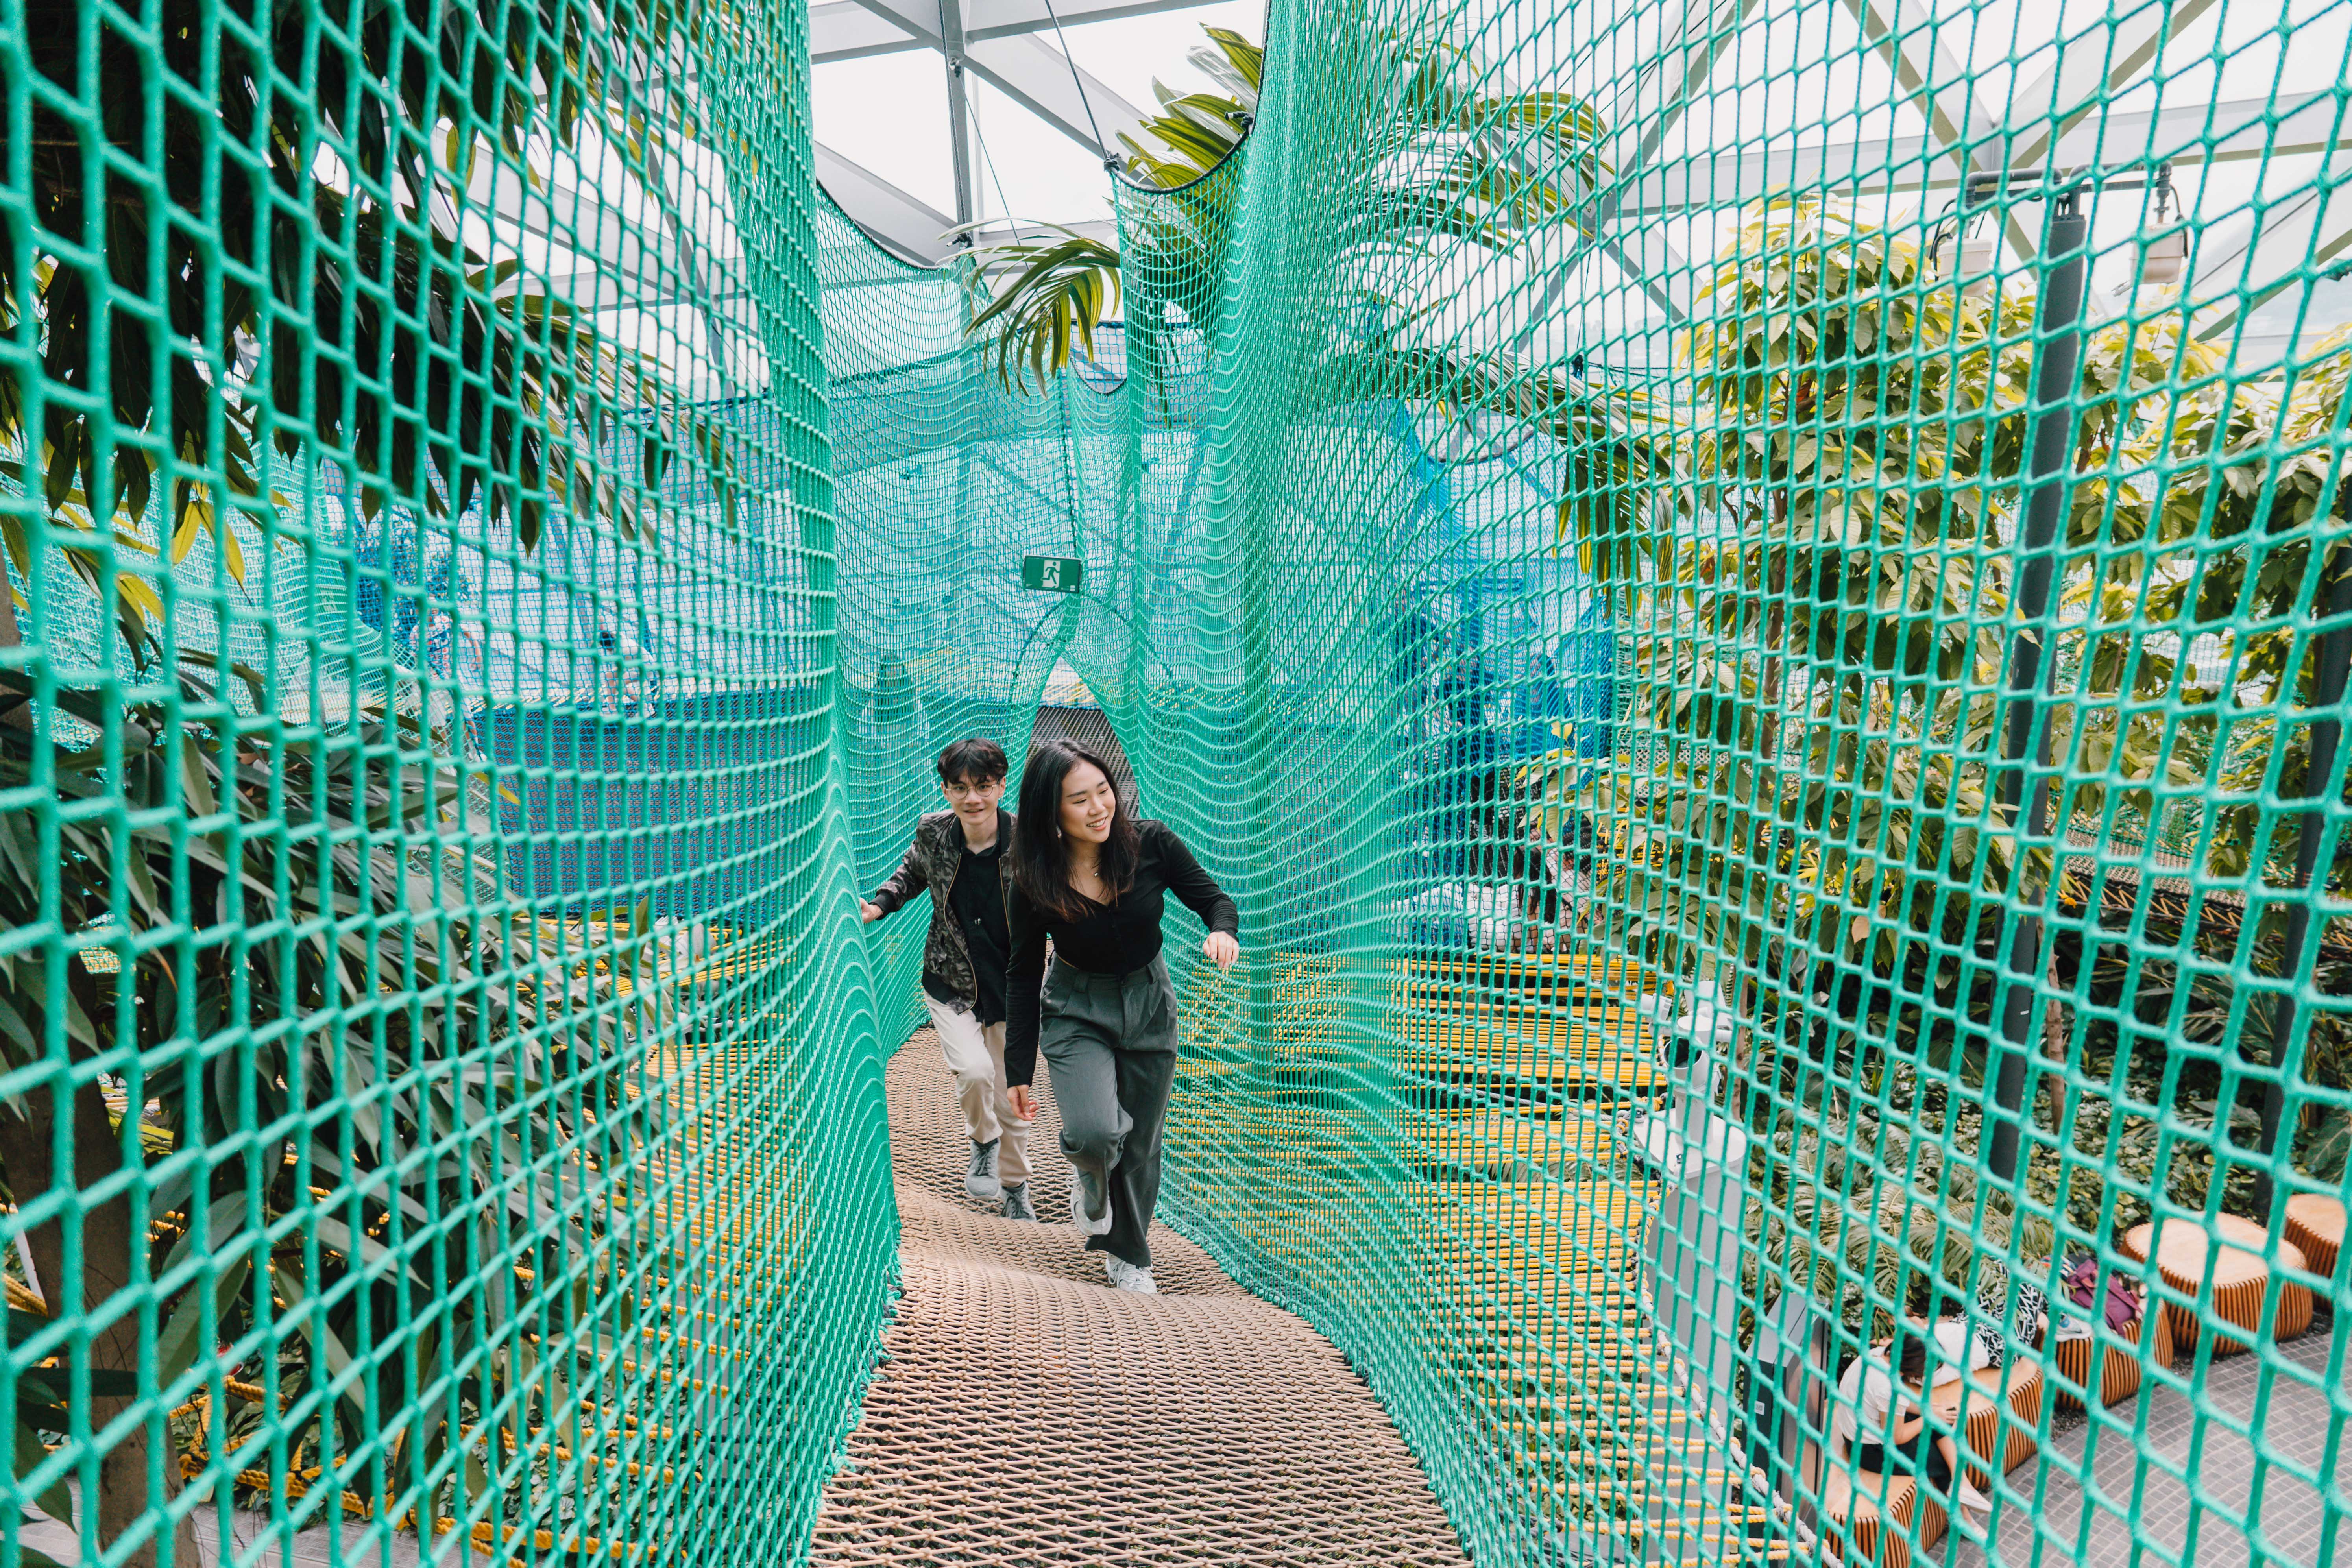 2 people walking through the Bouncing Nets